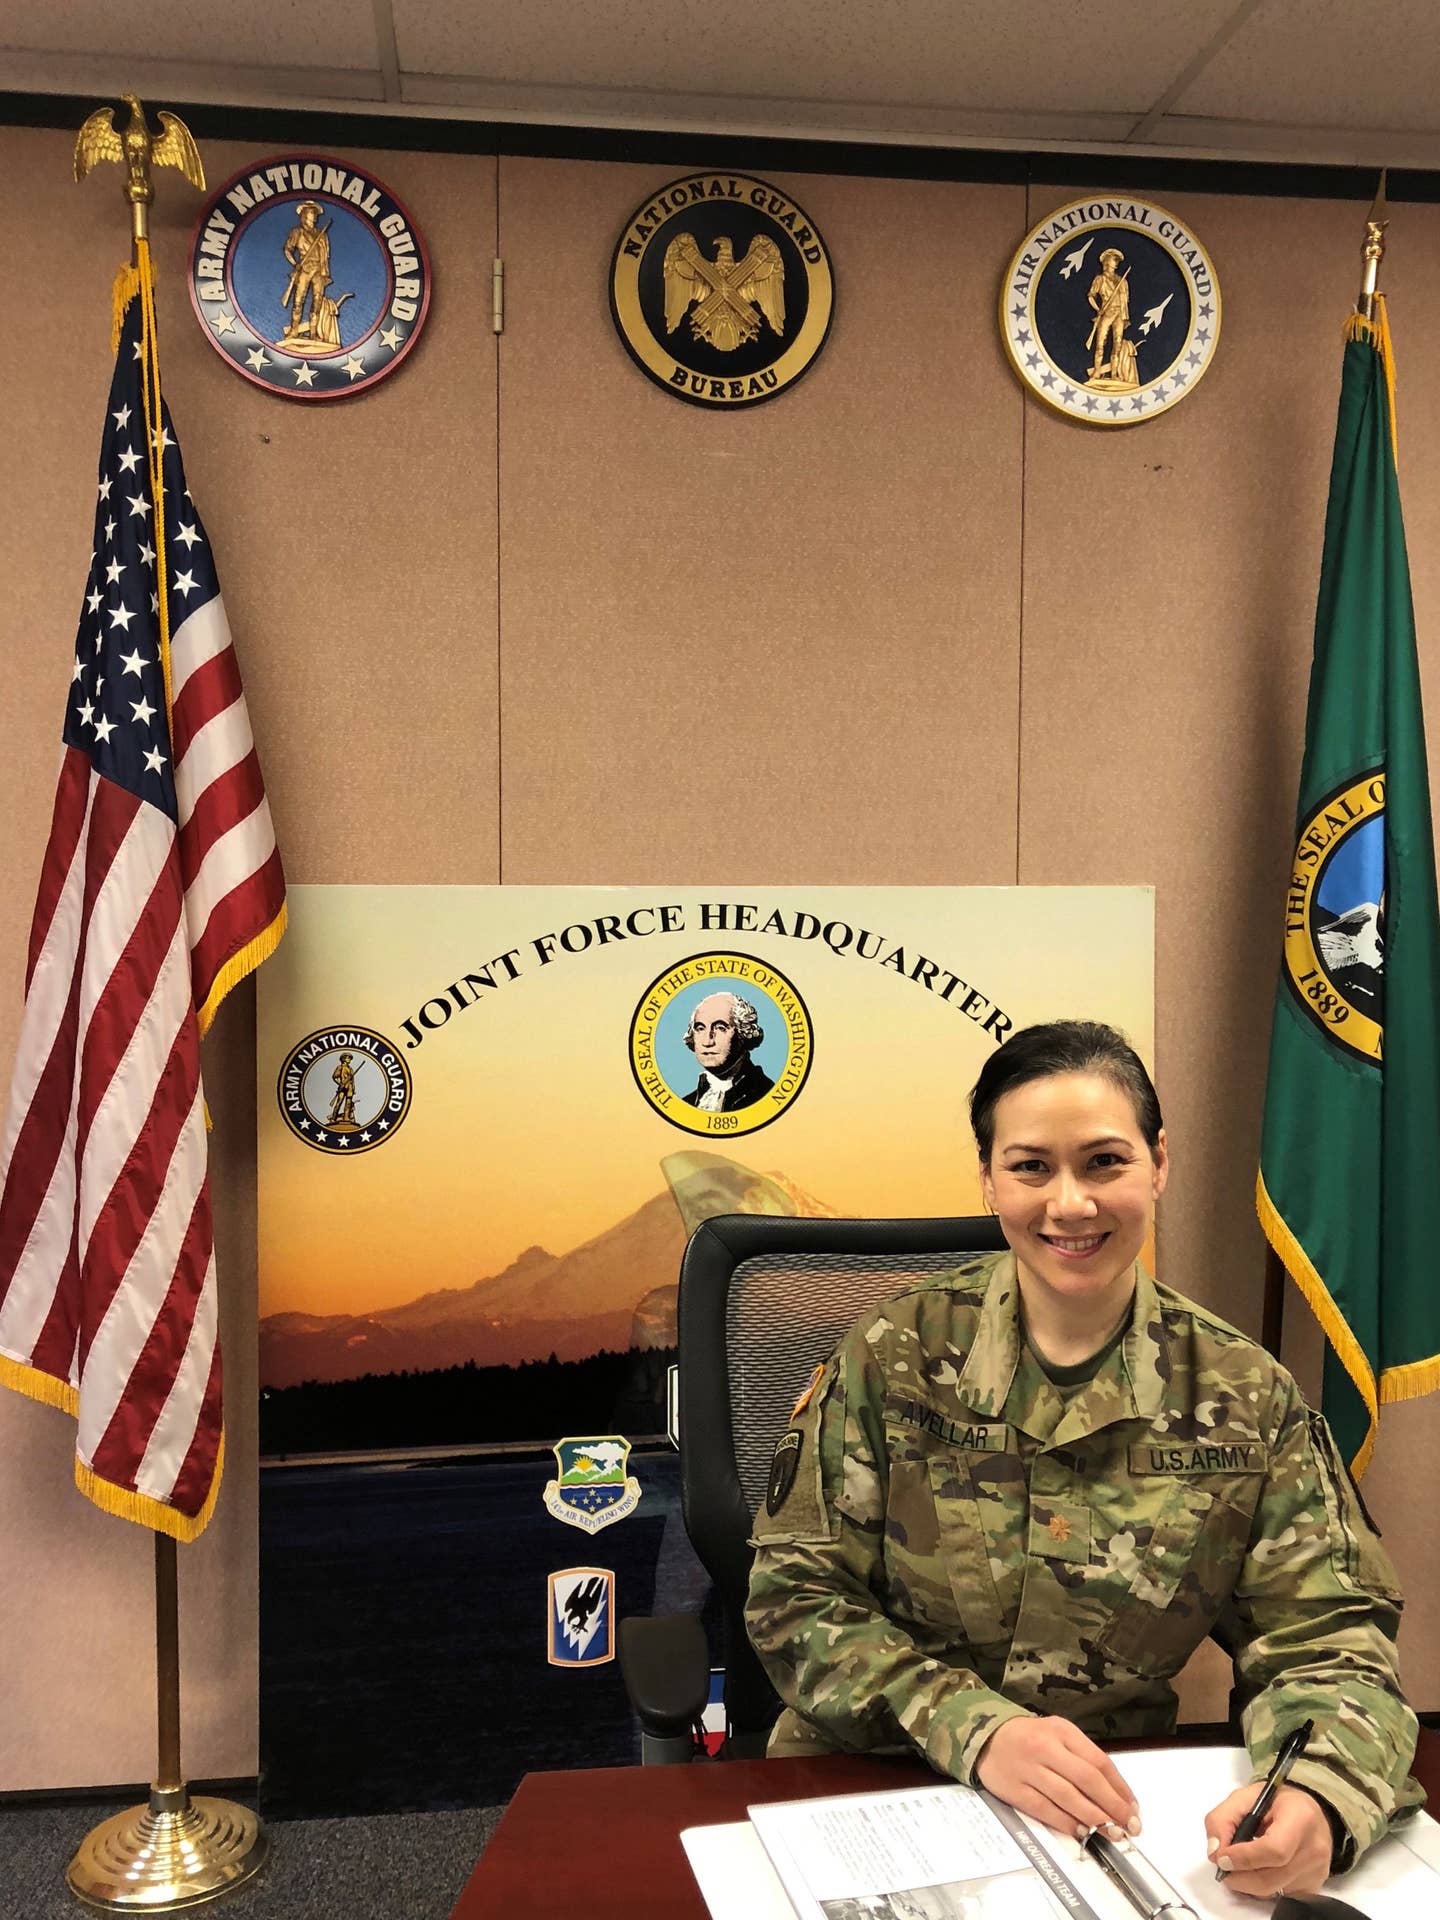 Avellar in her National Guard role.